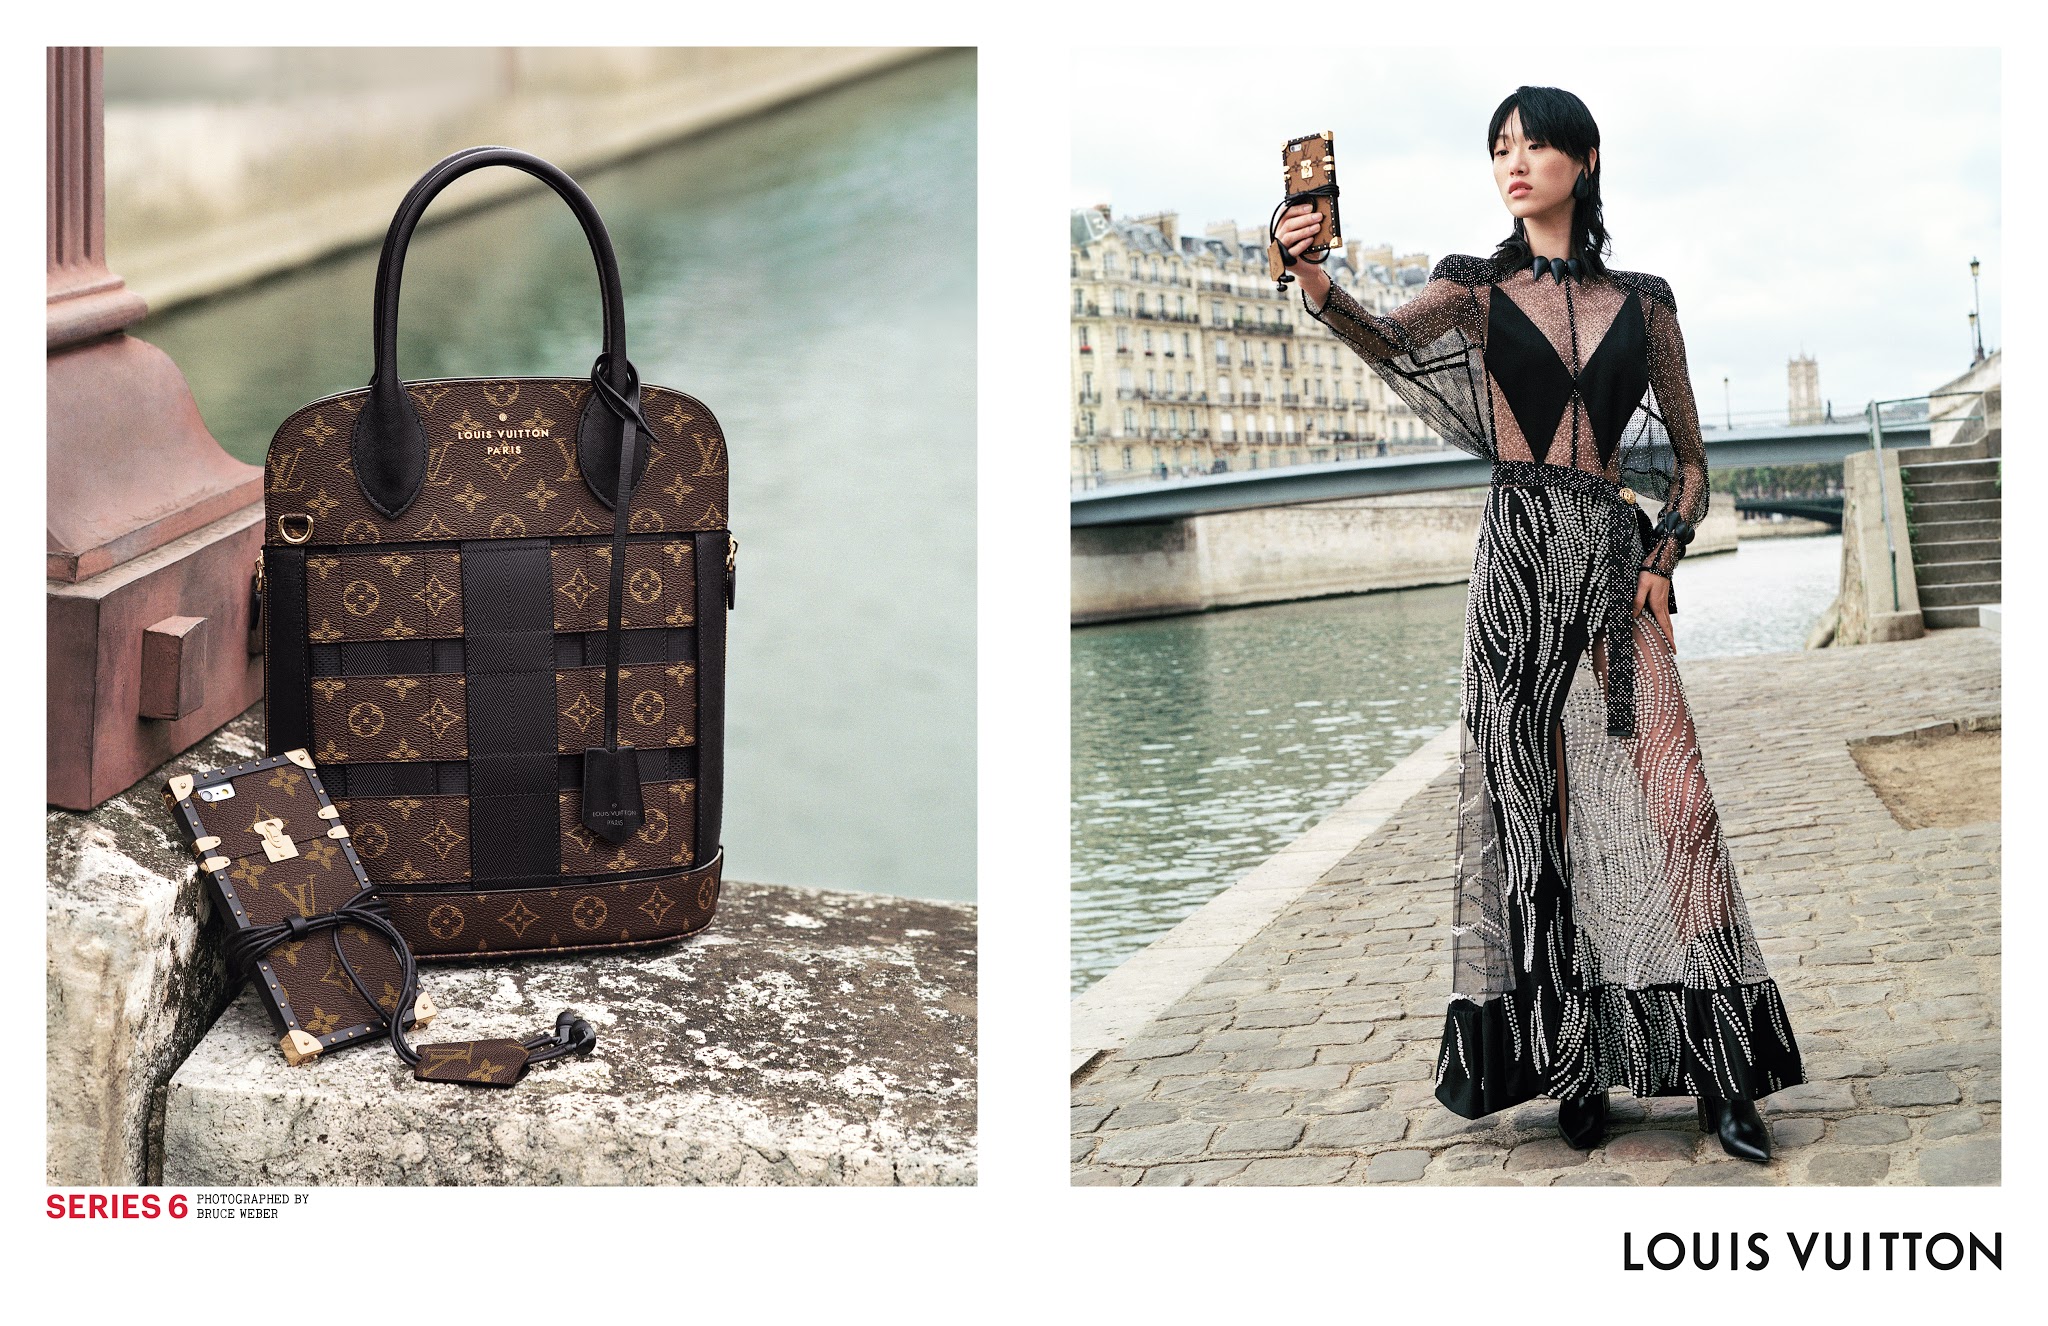 Louis Vuitton's Series 6 FULL Ad Campaign & Video